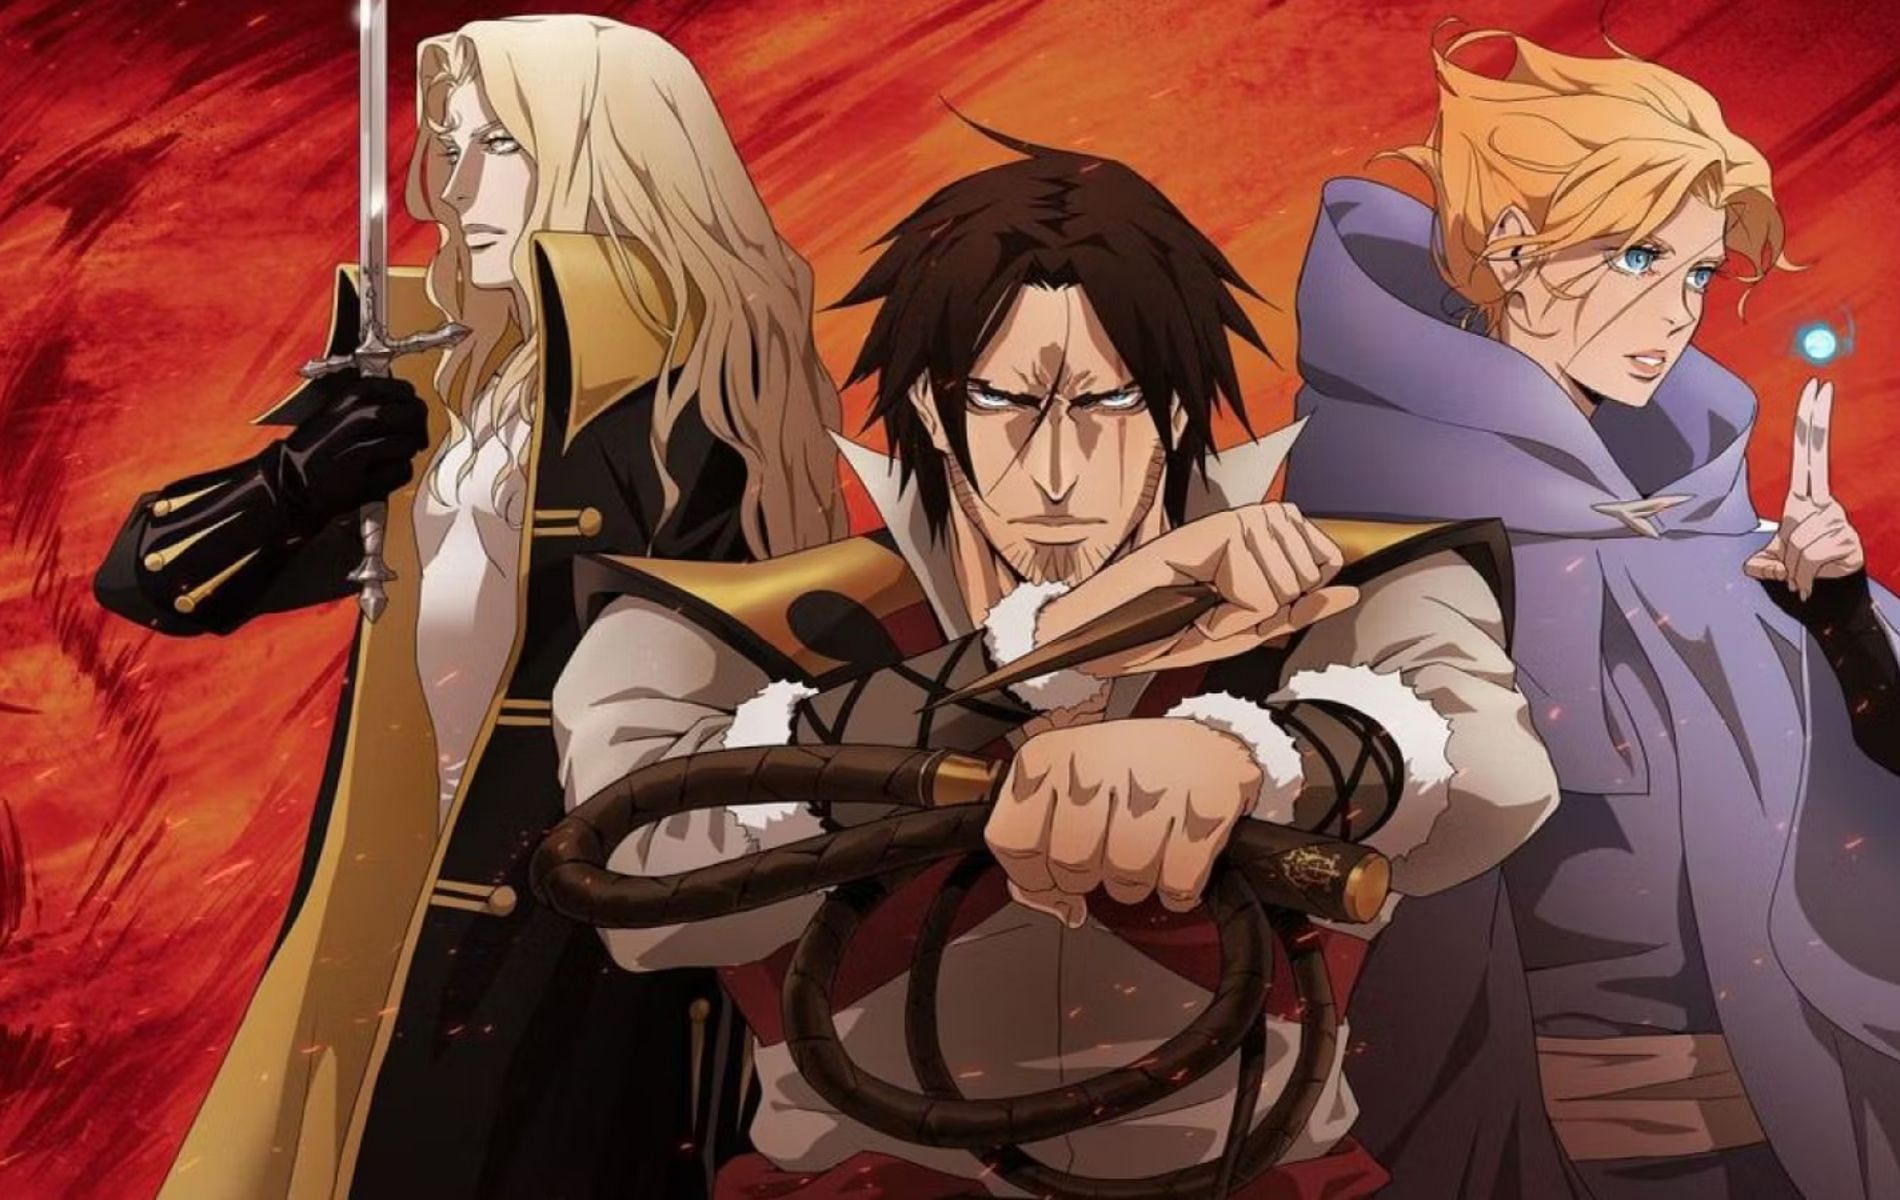 Which anime is better, Castlevania or Attack on Titan? - Quora